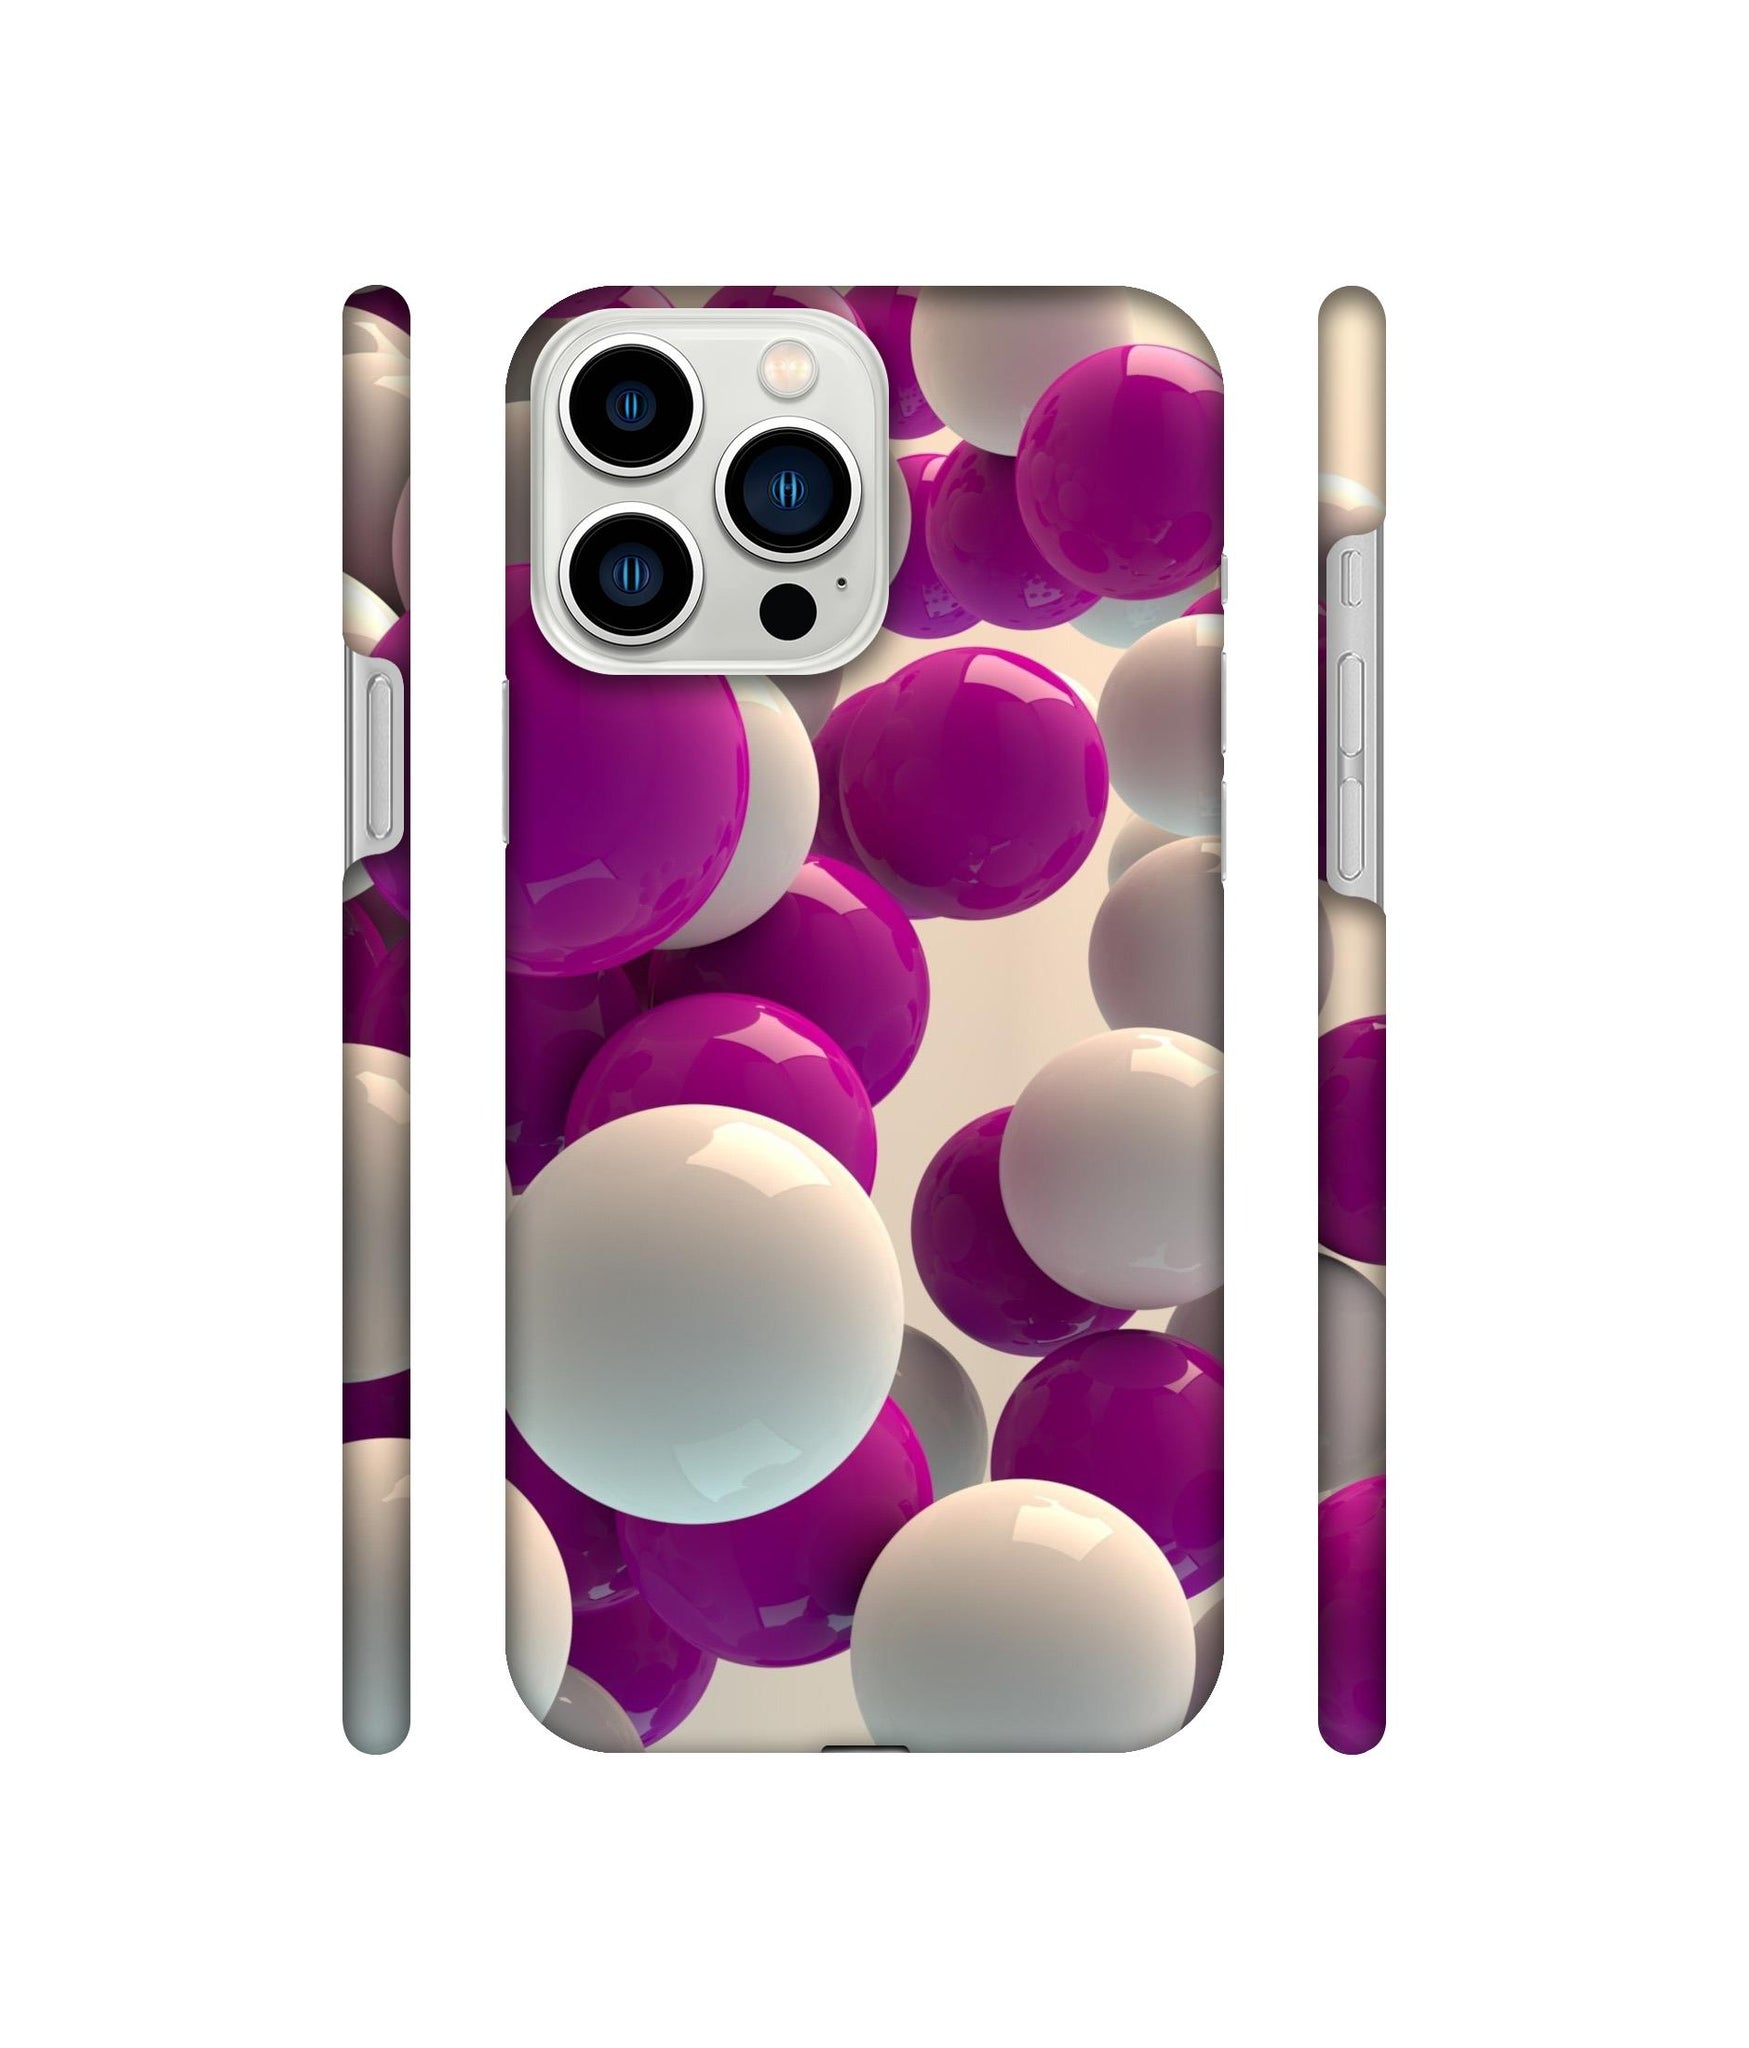 3D Balloons Designer Hard Back Cover for Apple iPhone 13 Pro Max